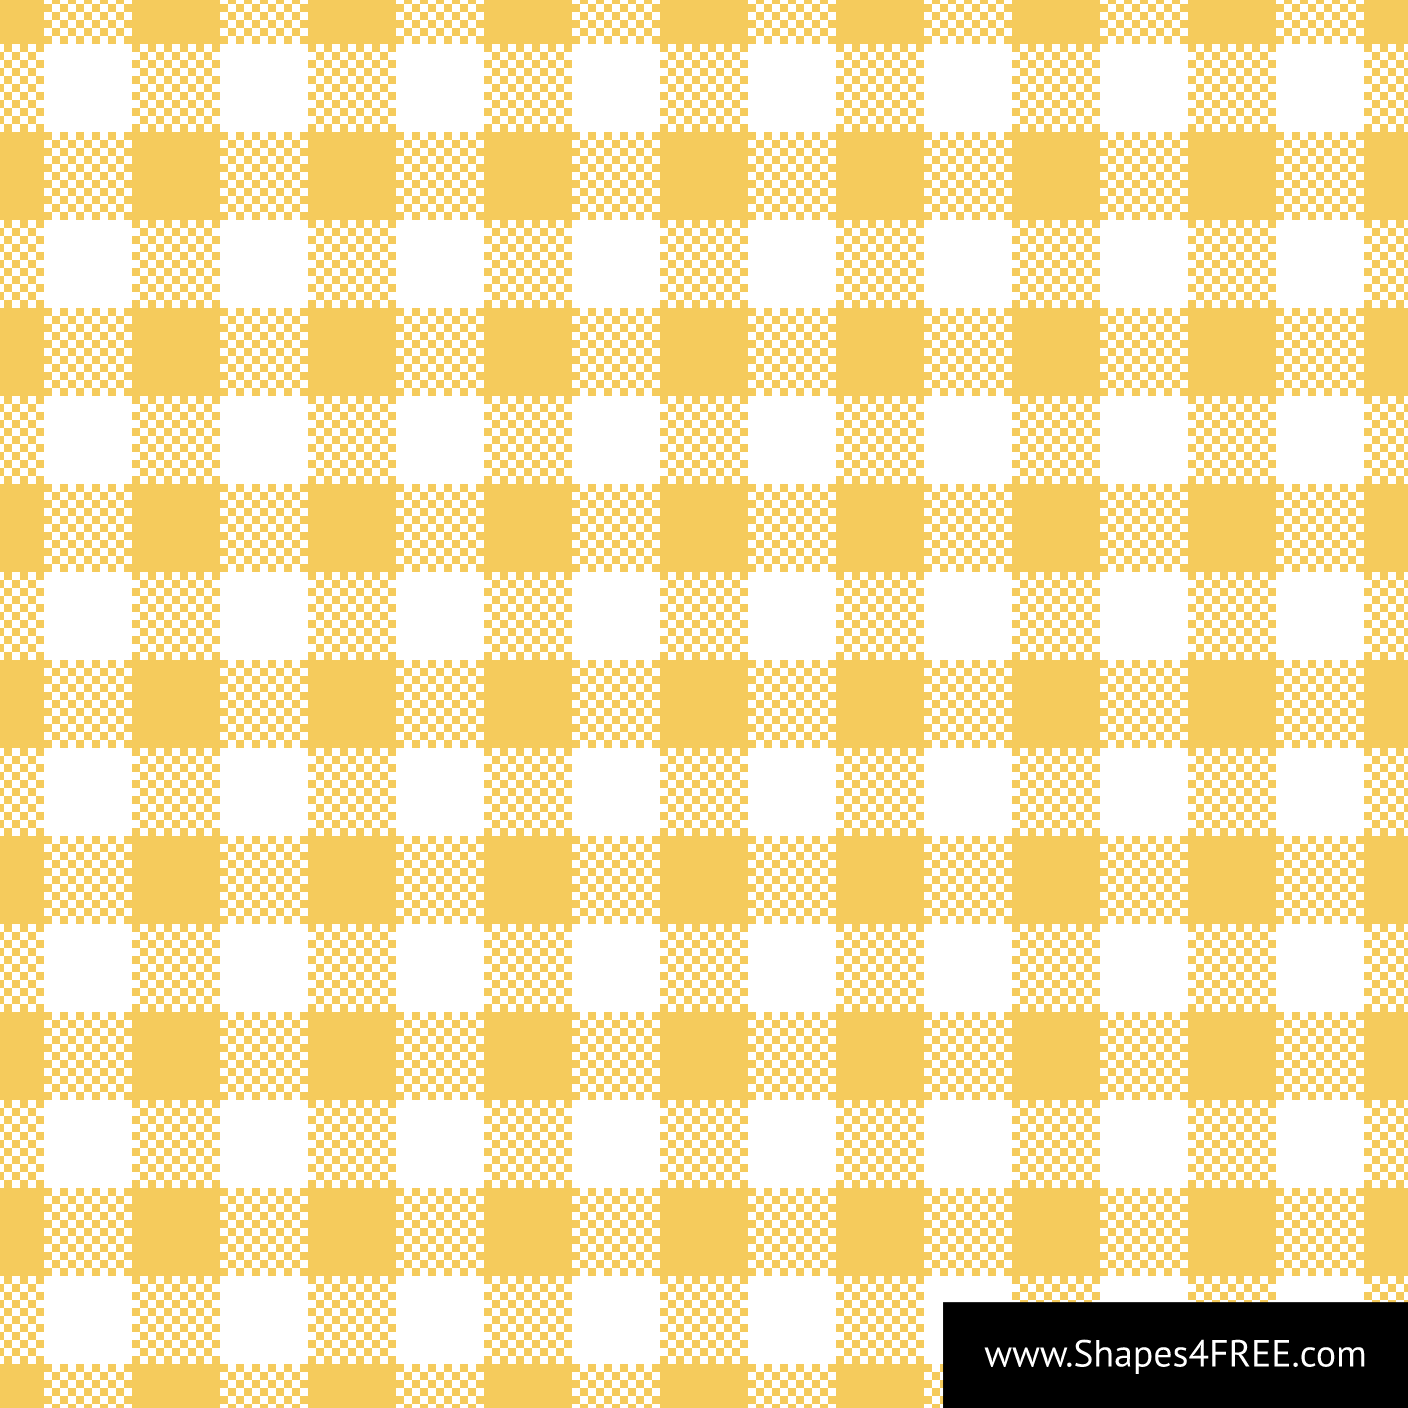 Yellow Gingham Pattern Vector (SVG)